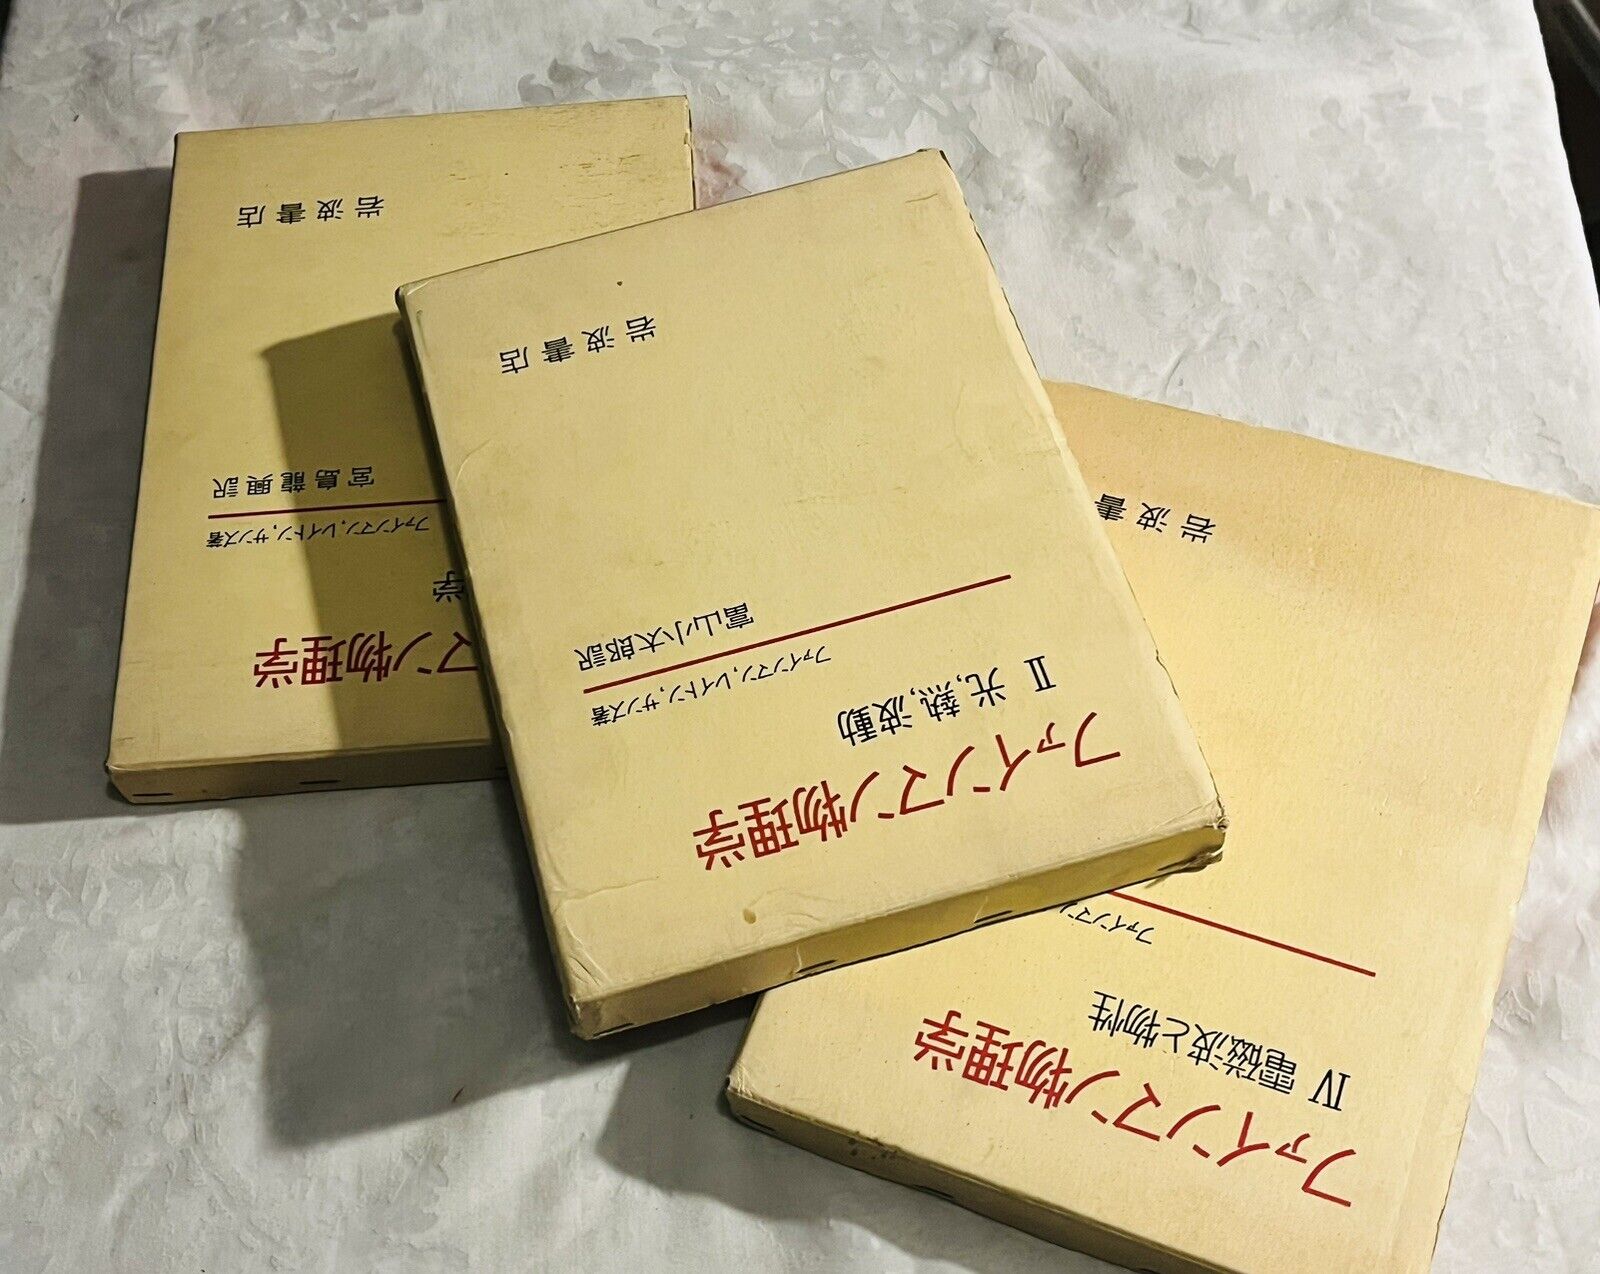 Richard Feynman Lectures 1965 in Japanese 3 Volumes in Slipcases Very Clean